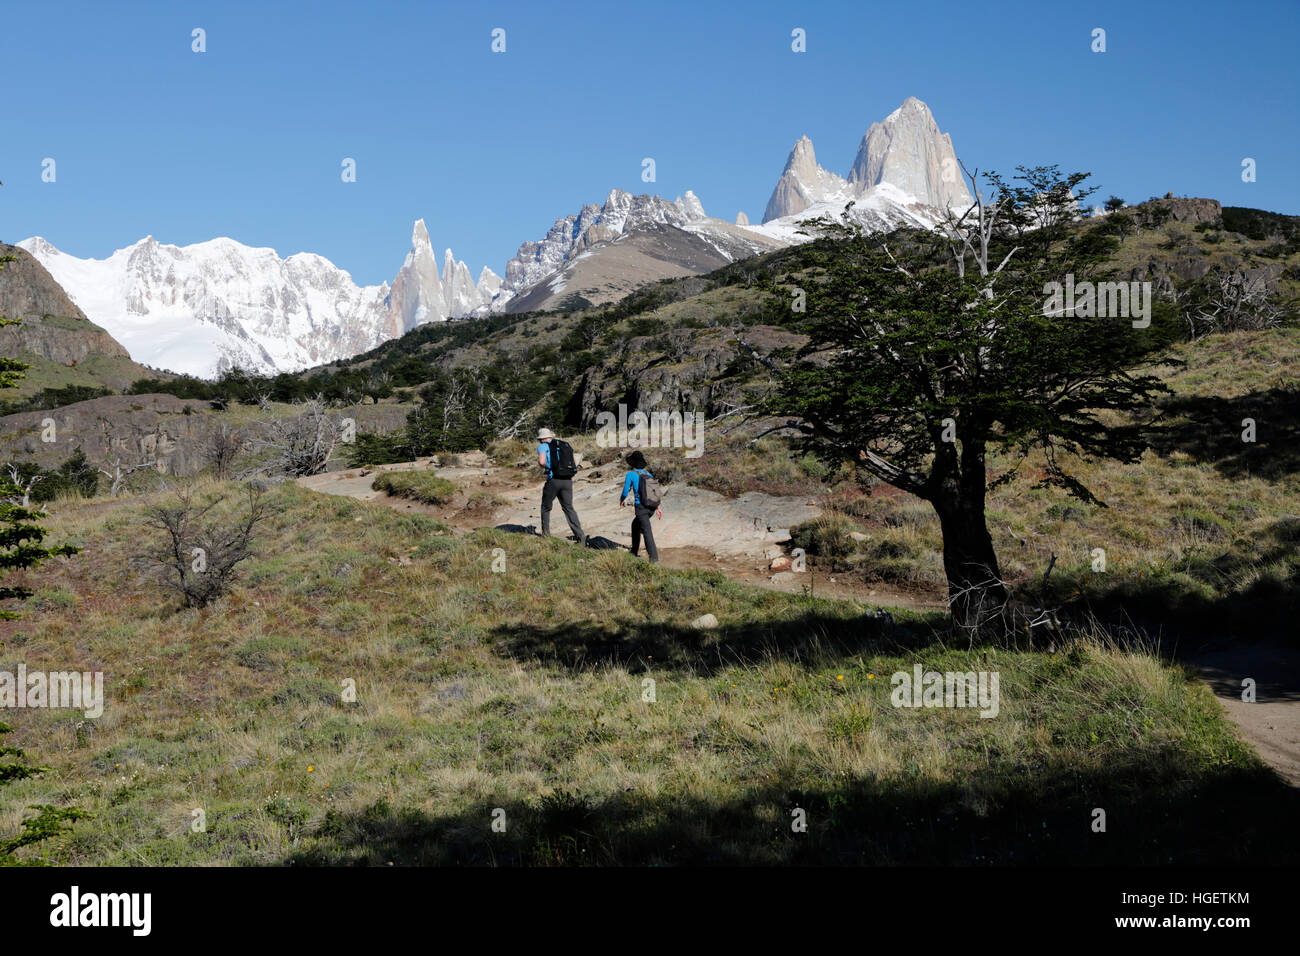 Hikers on trail to Laguna Torre with view of Cerro Torre and Mount Fitz Roy, El Chalten, Patagonia, Argentina, South America Stock Photo